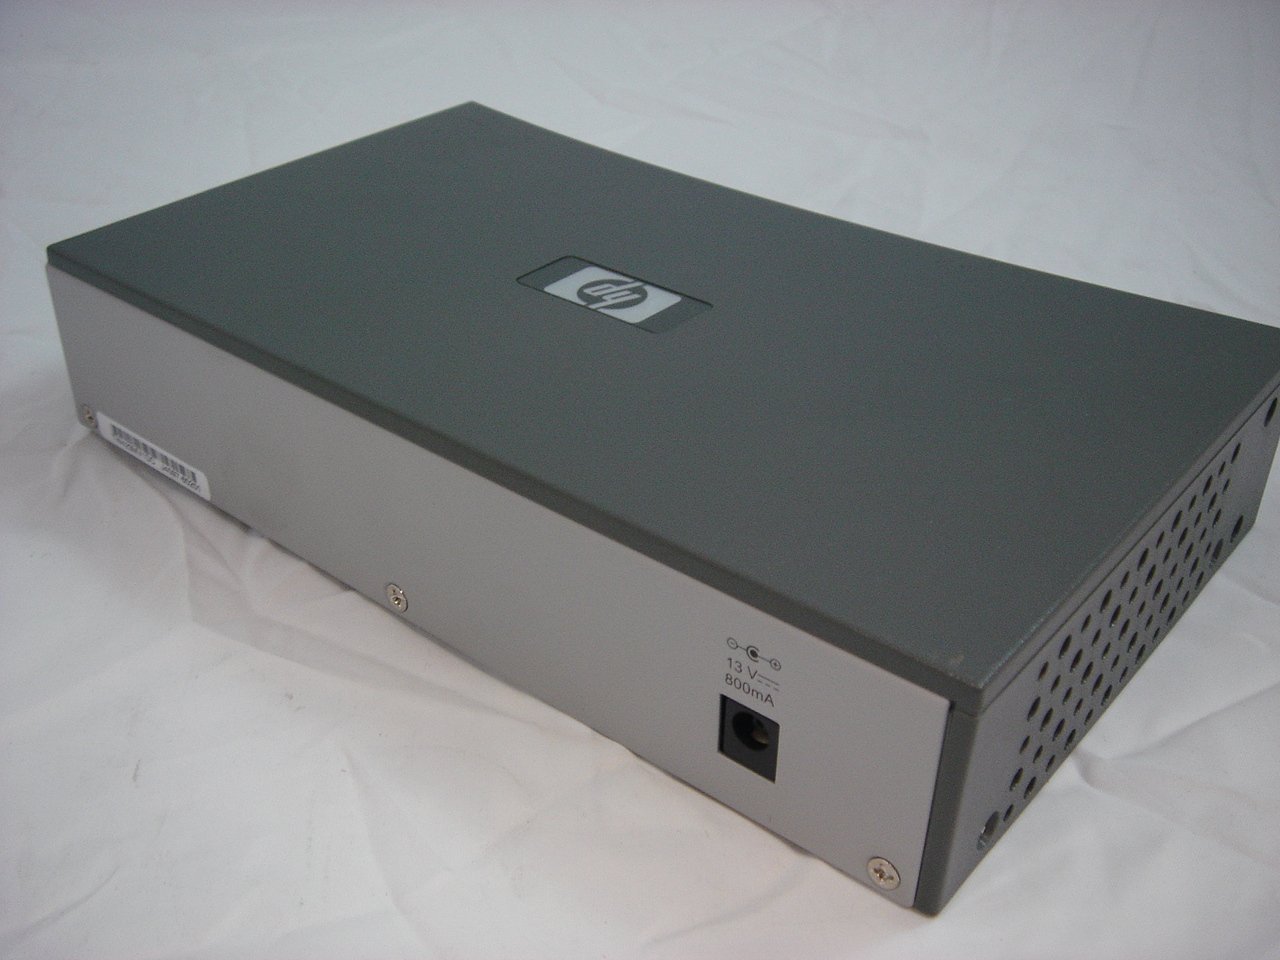 J4097B - HP ProCurve 408 8 Port 10BASE-T Switch Without Power Adapter - Refurbished